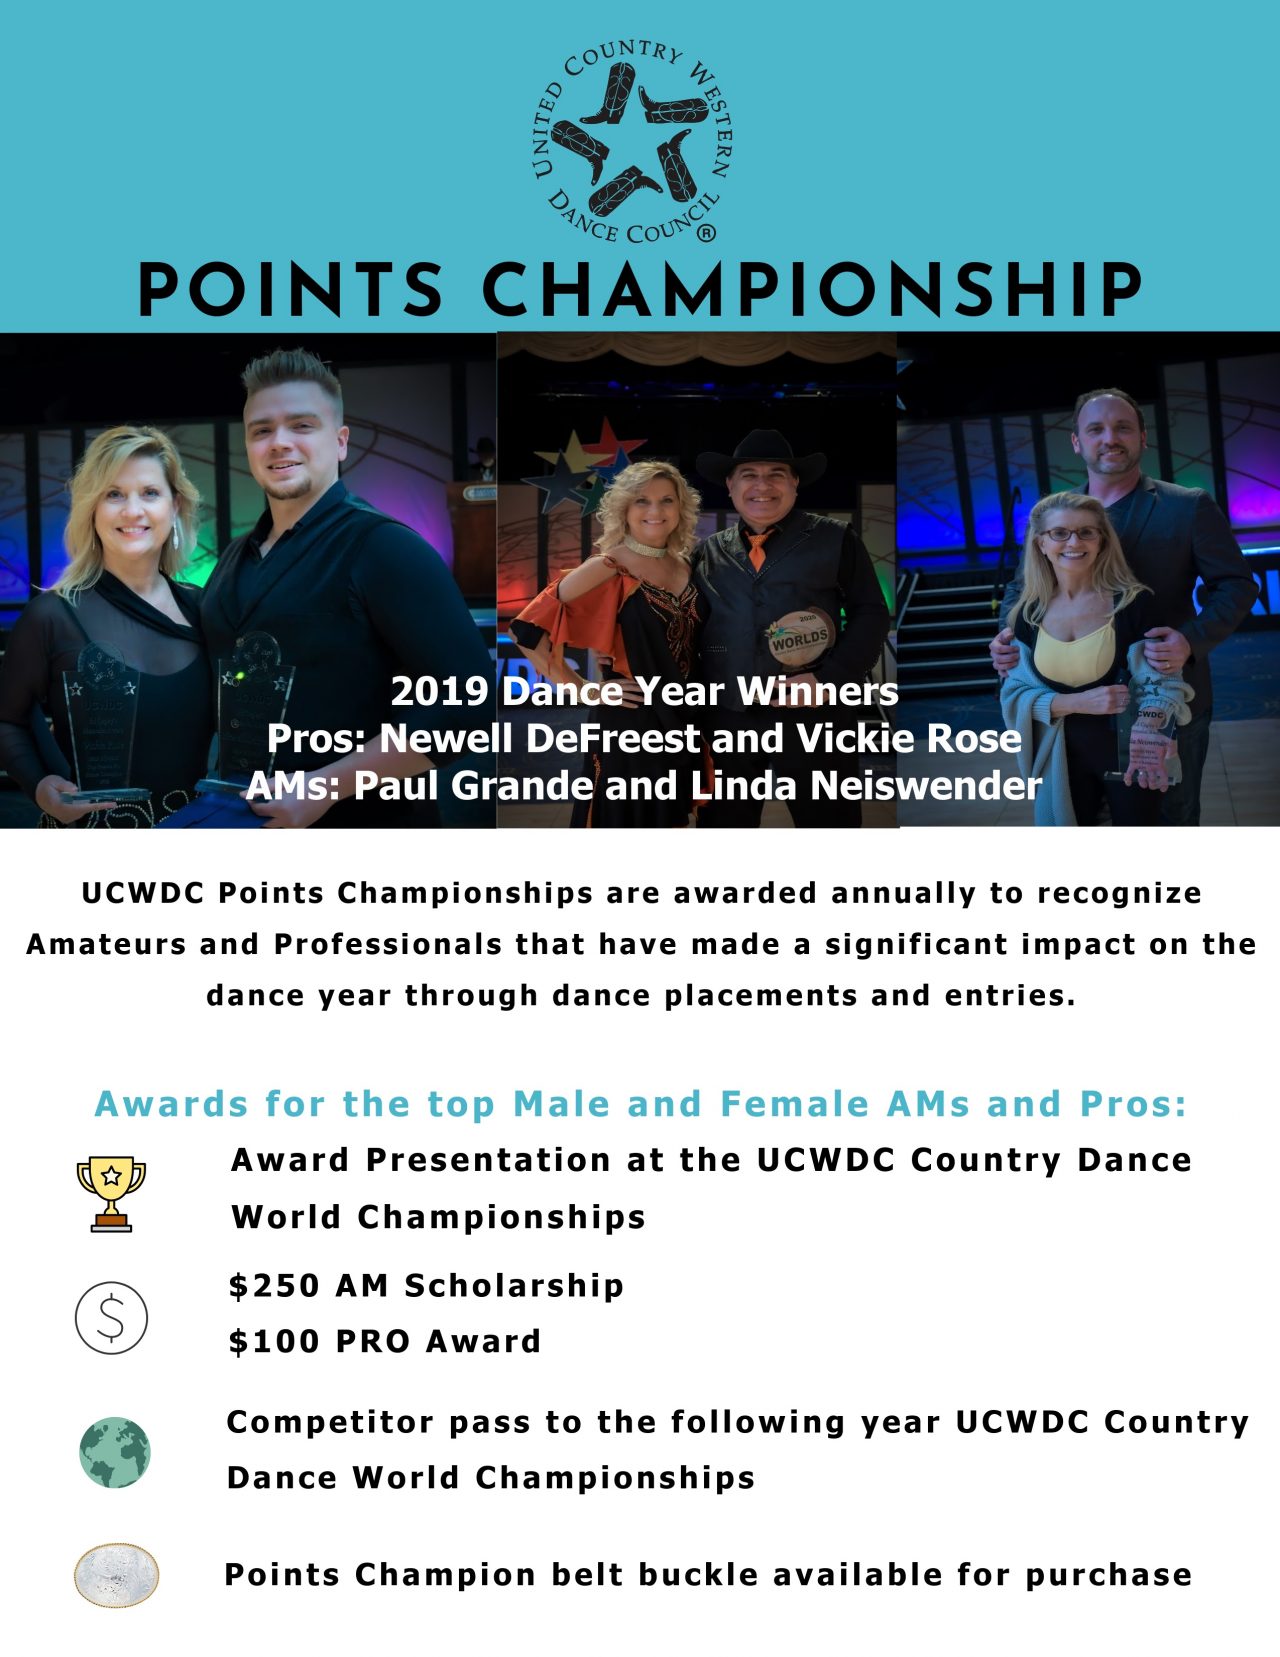 UCWDC Points ChampionshipsUCWDC